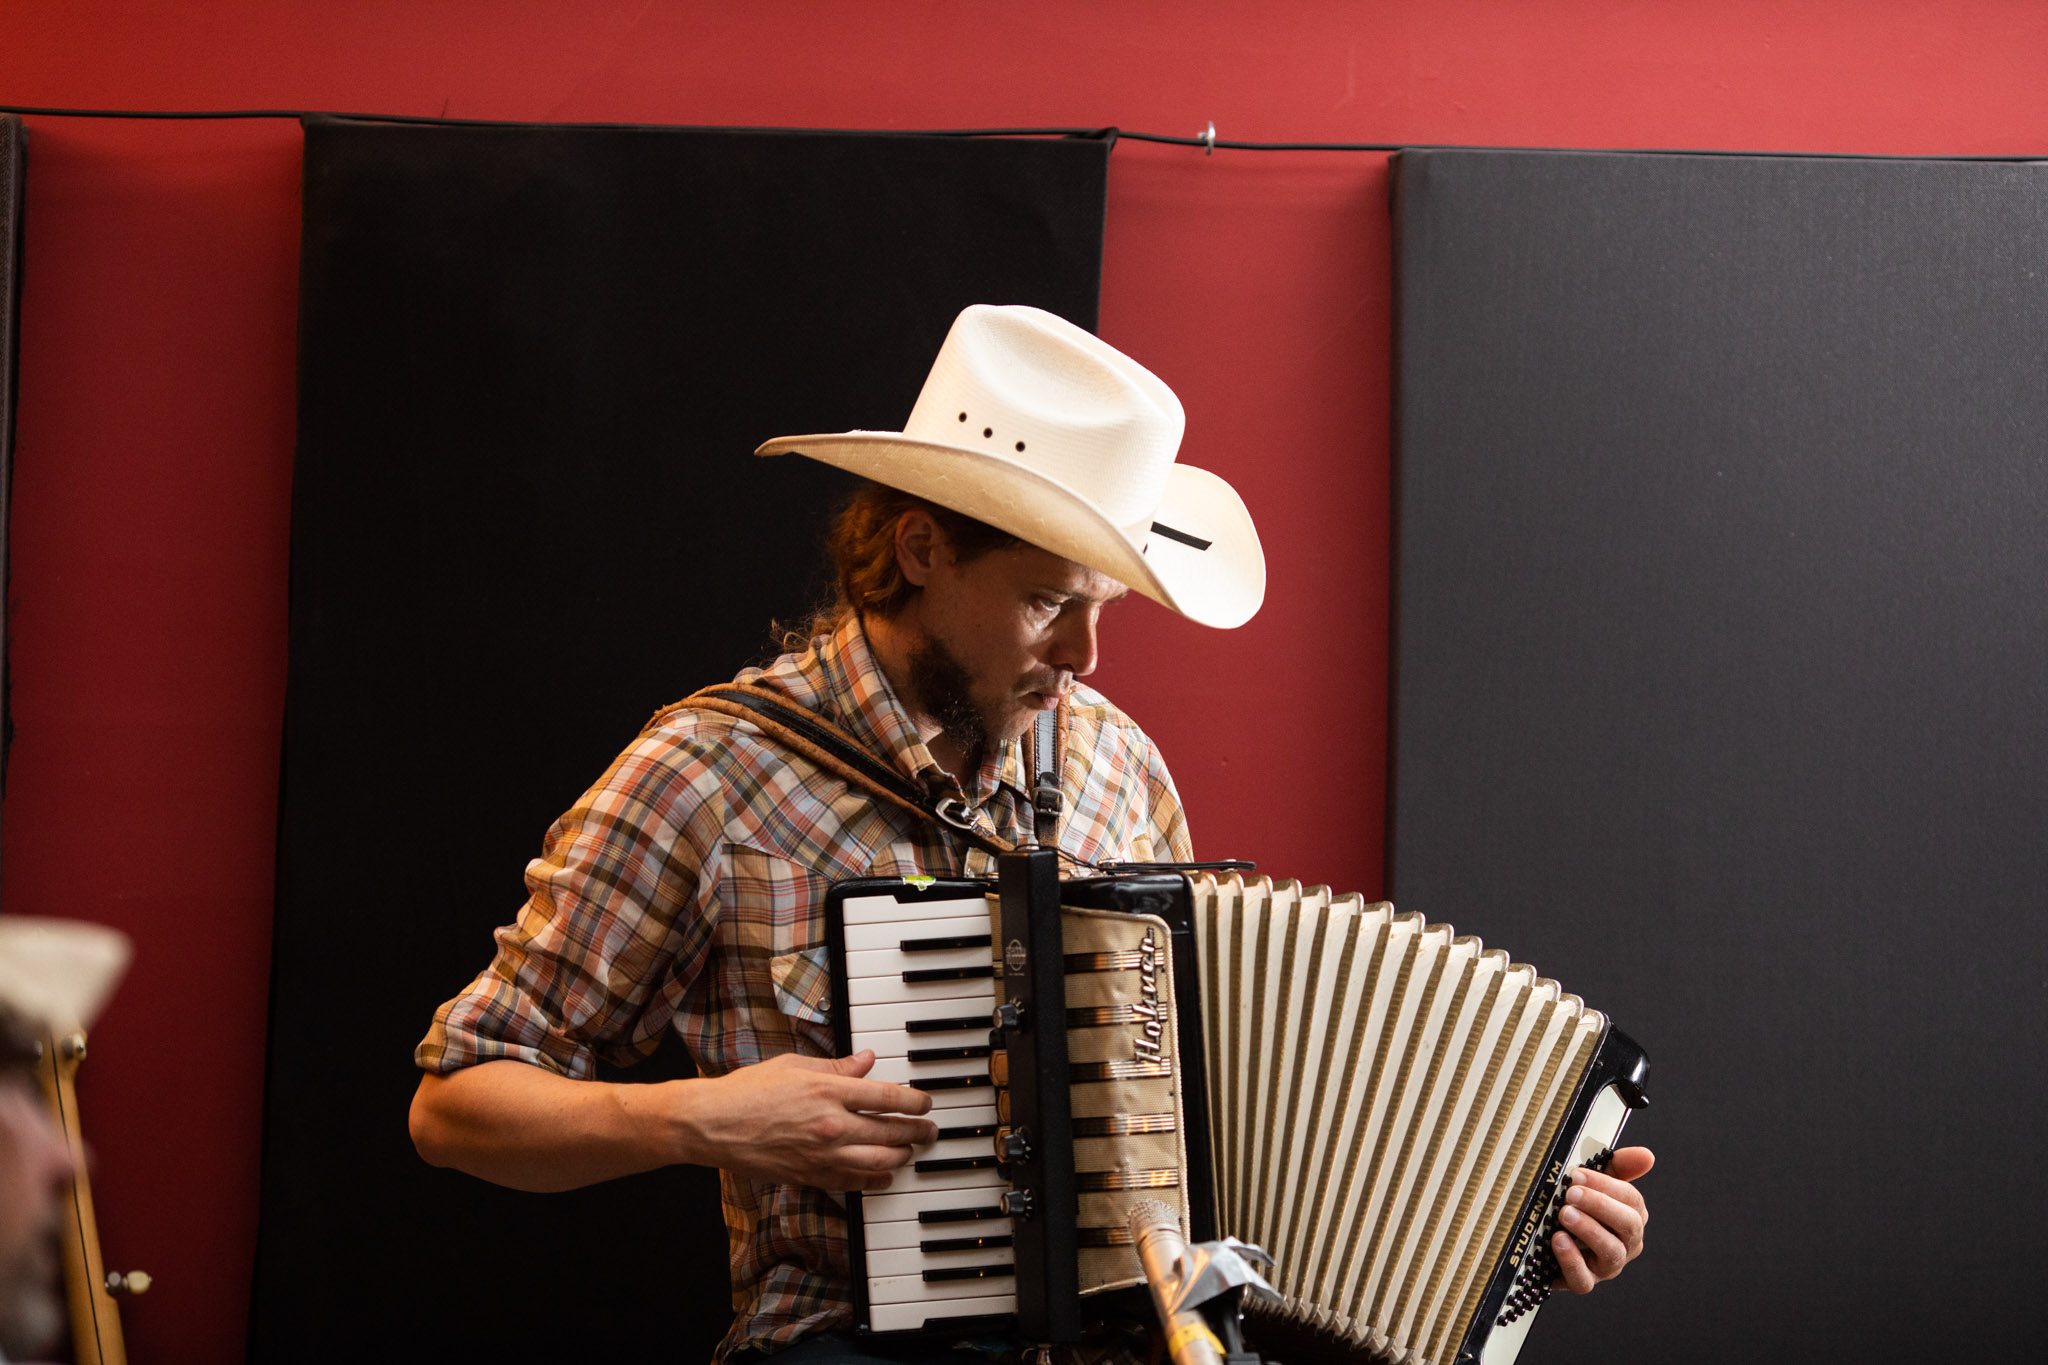 The Mayehmingways playing the accordion at Frederick House Audio.jpg